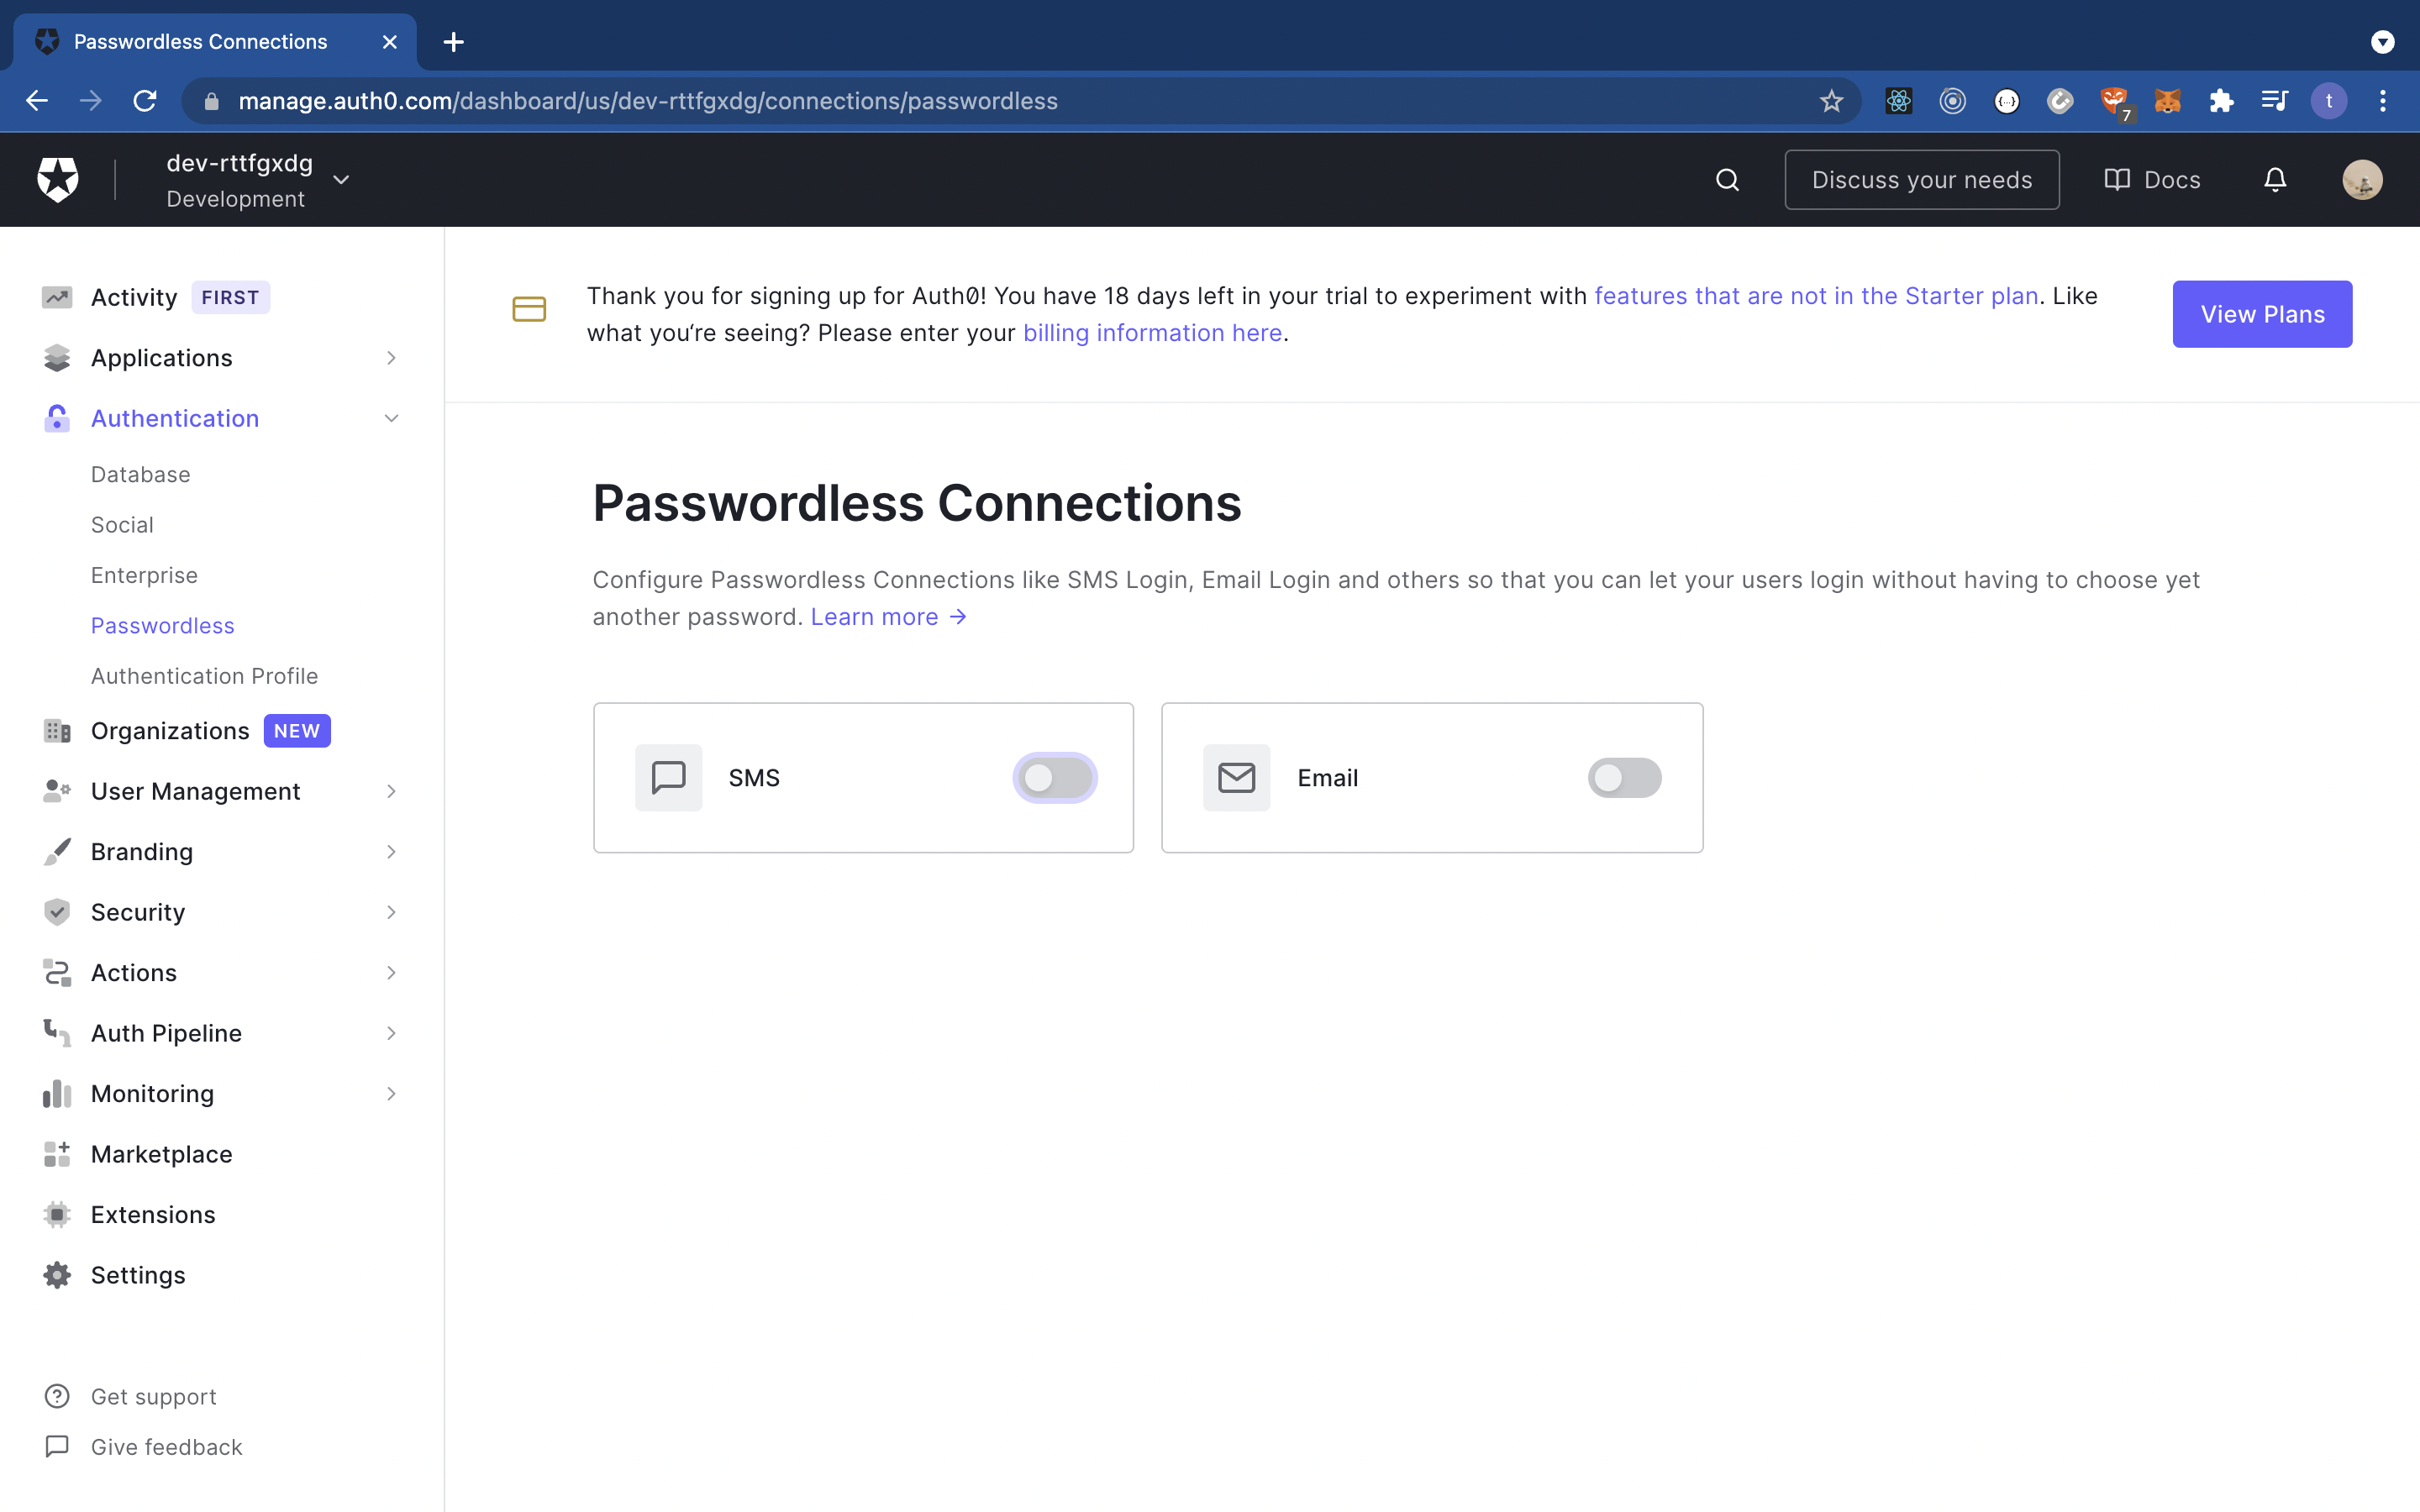 A screenshot of the Auth0 application Passwordless Connections settings tab, allowing users to enable SMS or Email as an option